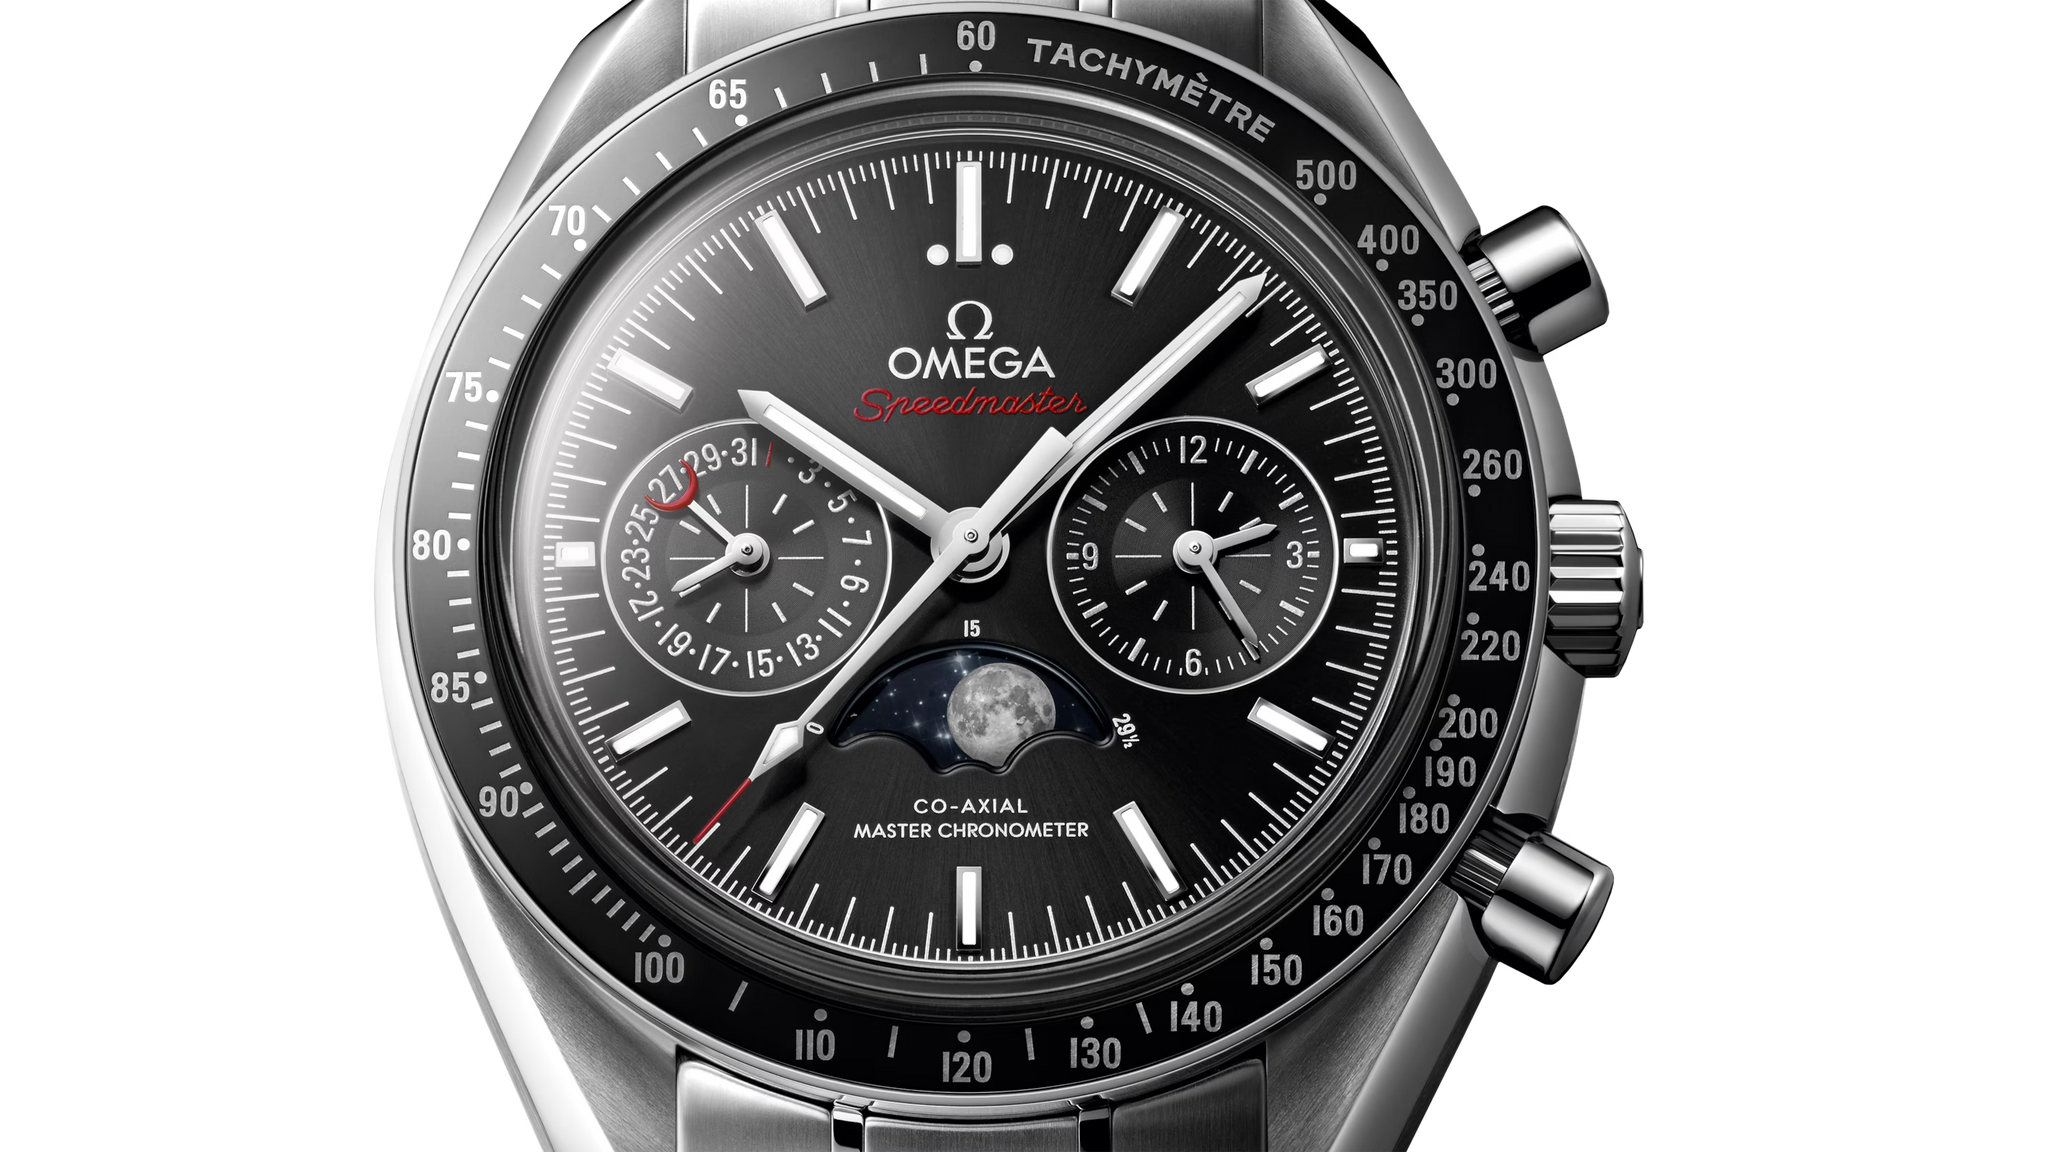 OMEGA-SPEEDMASTER MOONPHASE CO‑AXIAL MASTER CHRONOMETER MOONPHASE CHRONOGRAPH 44.25 MM 304.30.44.52.01.001